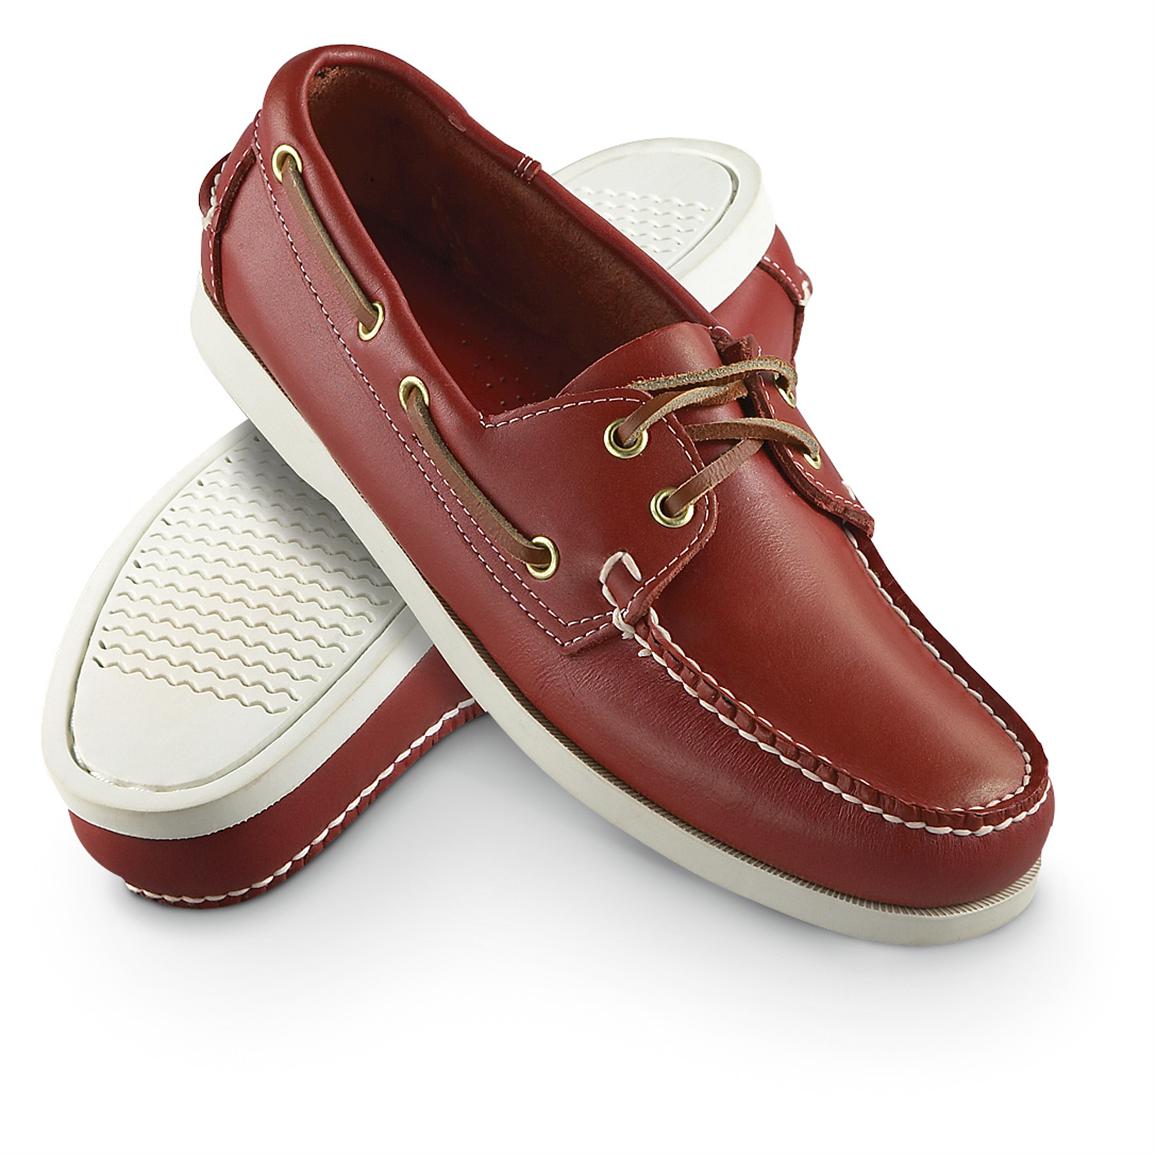 island surf boat shoes